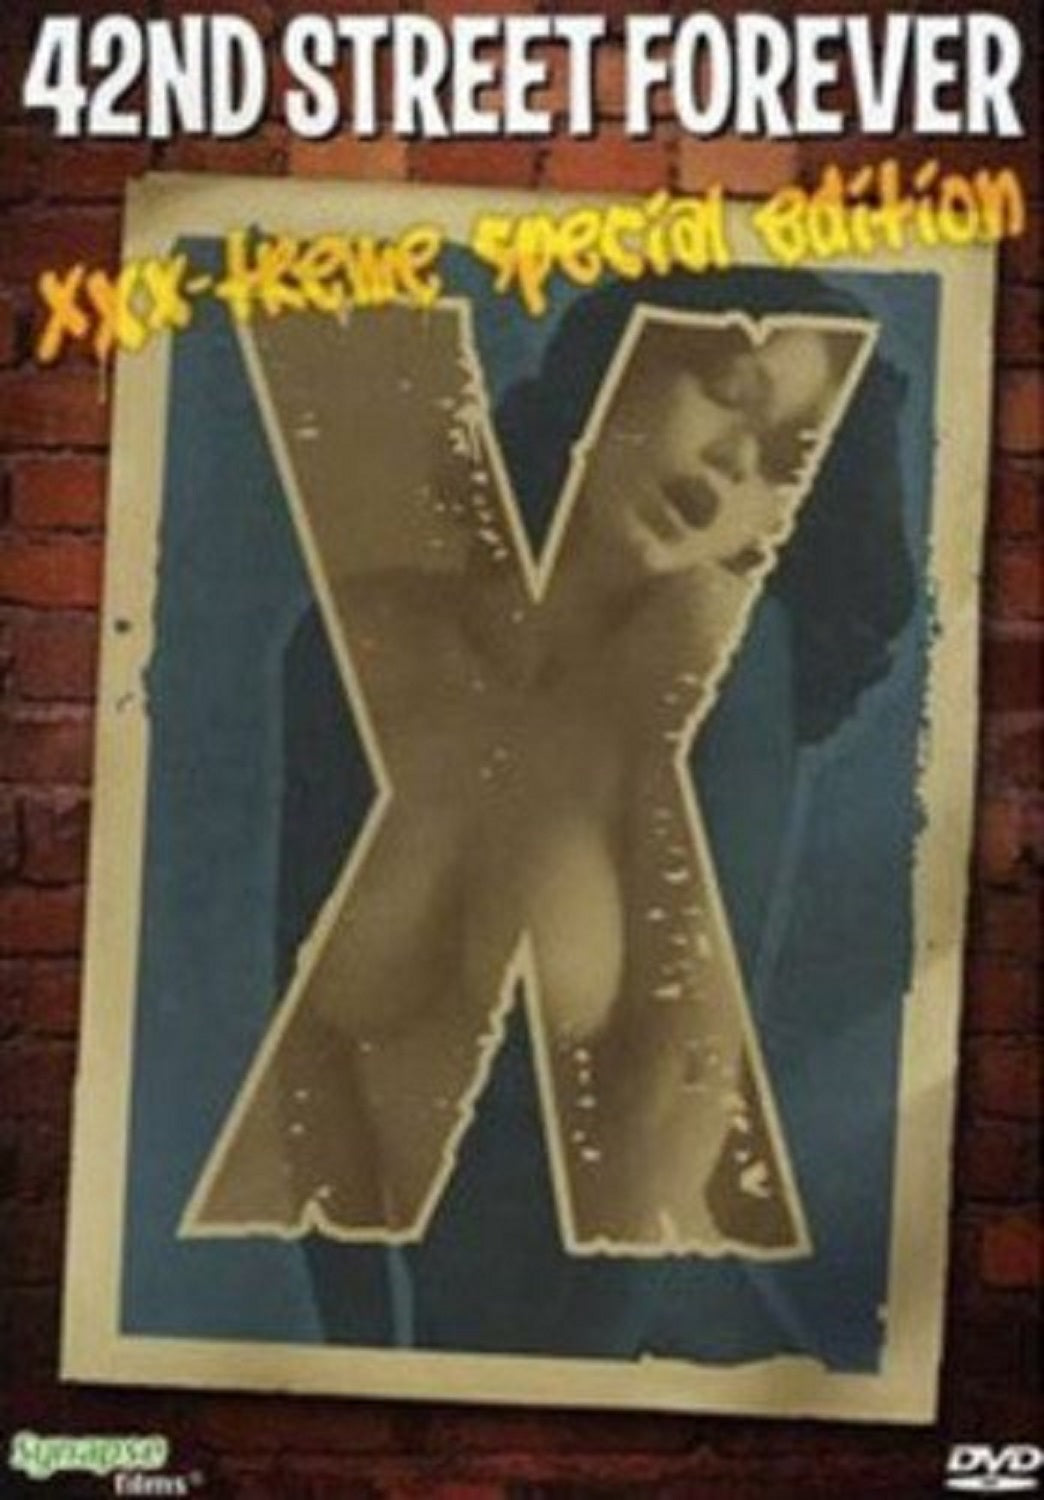 42Nd Street Forever: Xxx-Treme Special Edition Dvd